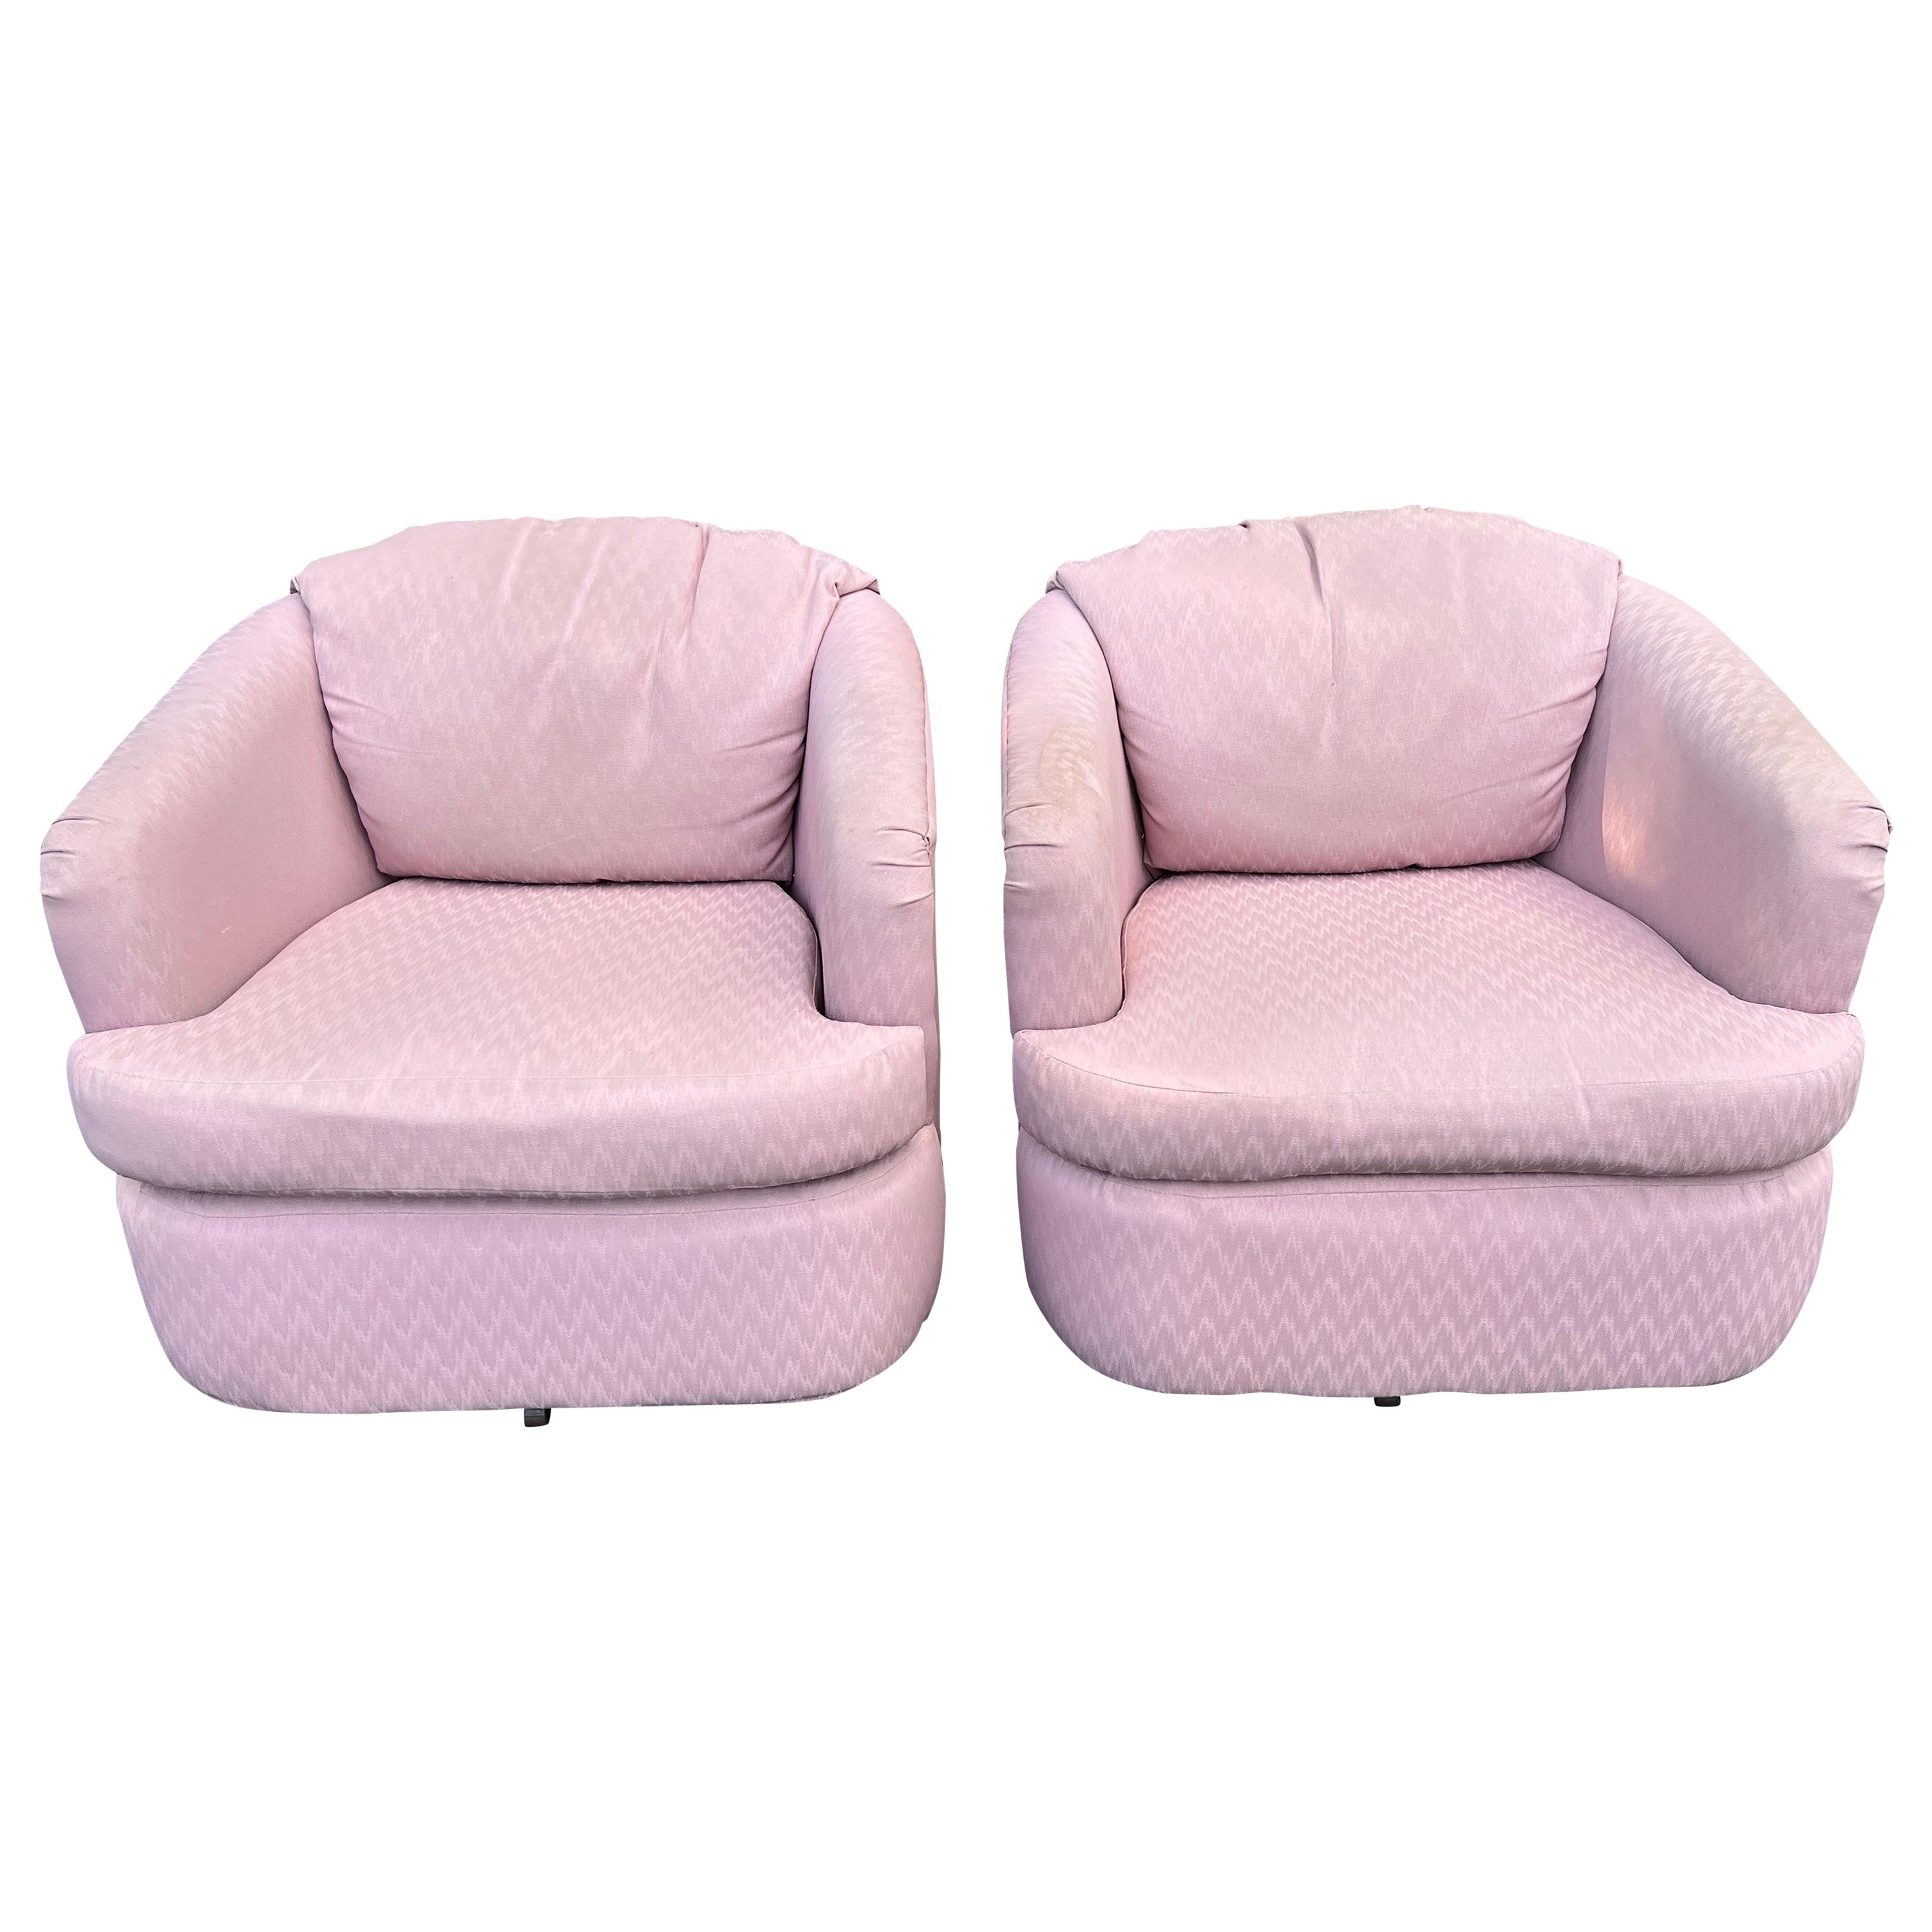 Pair of  Dusty Pink Swivel Club Chairs For Sale